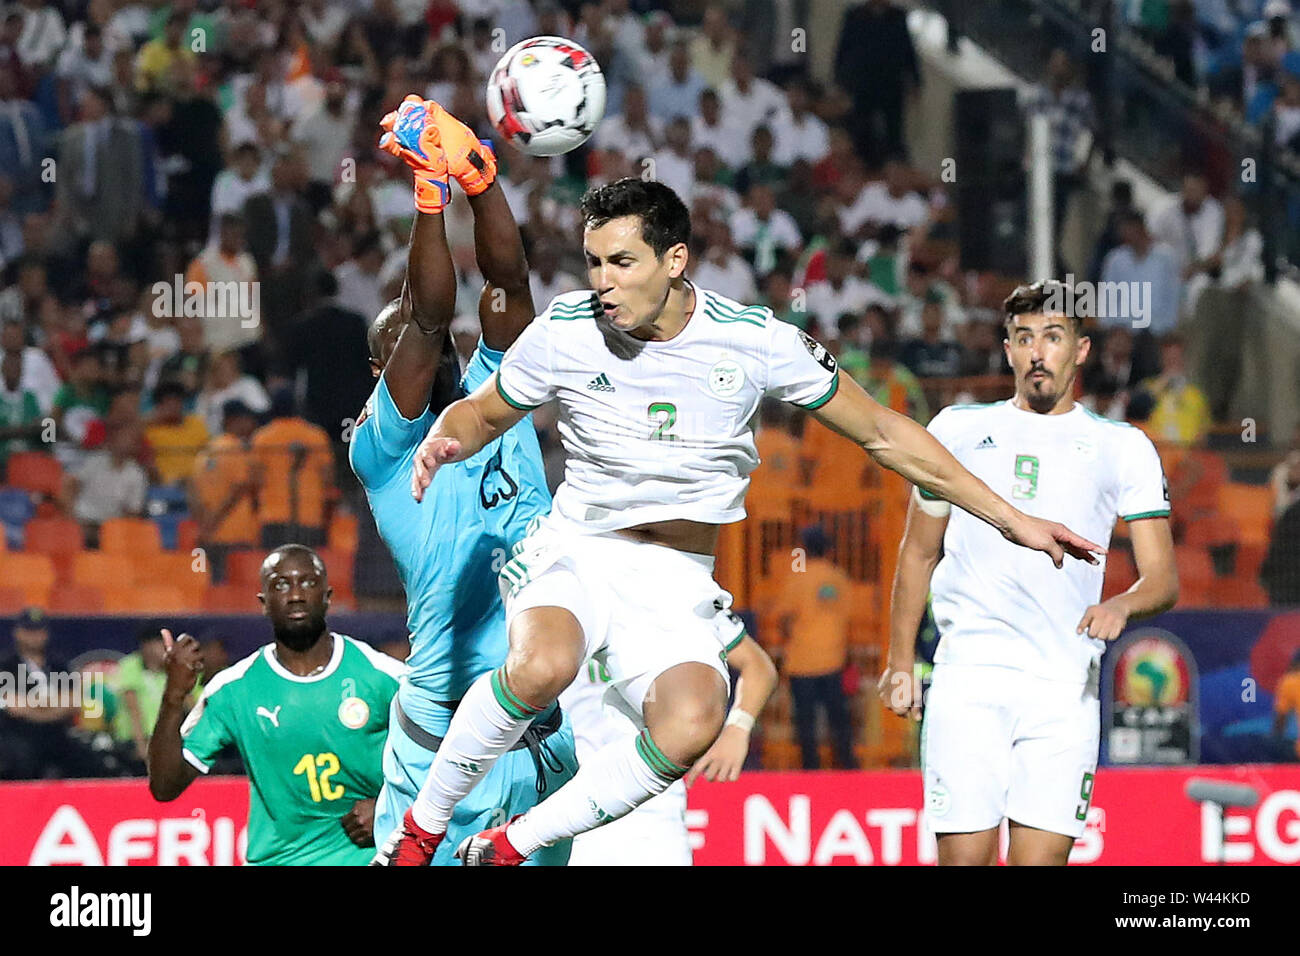 Cairo, Senegal vies with Aissa Mandi (2nd R) of Algeria during the 2019 Africa Cup of Nations final match between Senegal and Algeria in Cairo. 19th July, 2019. Amigo Alfred Junior Gomis (L), goalkeeper of Senegal vies with Aissa Mandi (2nd R) of Algeria during the 2019 Africa Cup of Nations final match between Senegal and Algeria in Cairo, Egypt on July 19, 2019. Algeria won 1-0 and claimed the title. Credit: Wang Teng/Xinhua/Alamy Live News Stock Photo